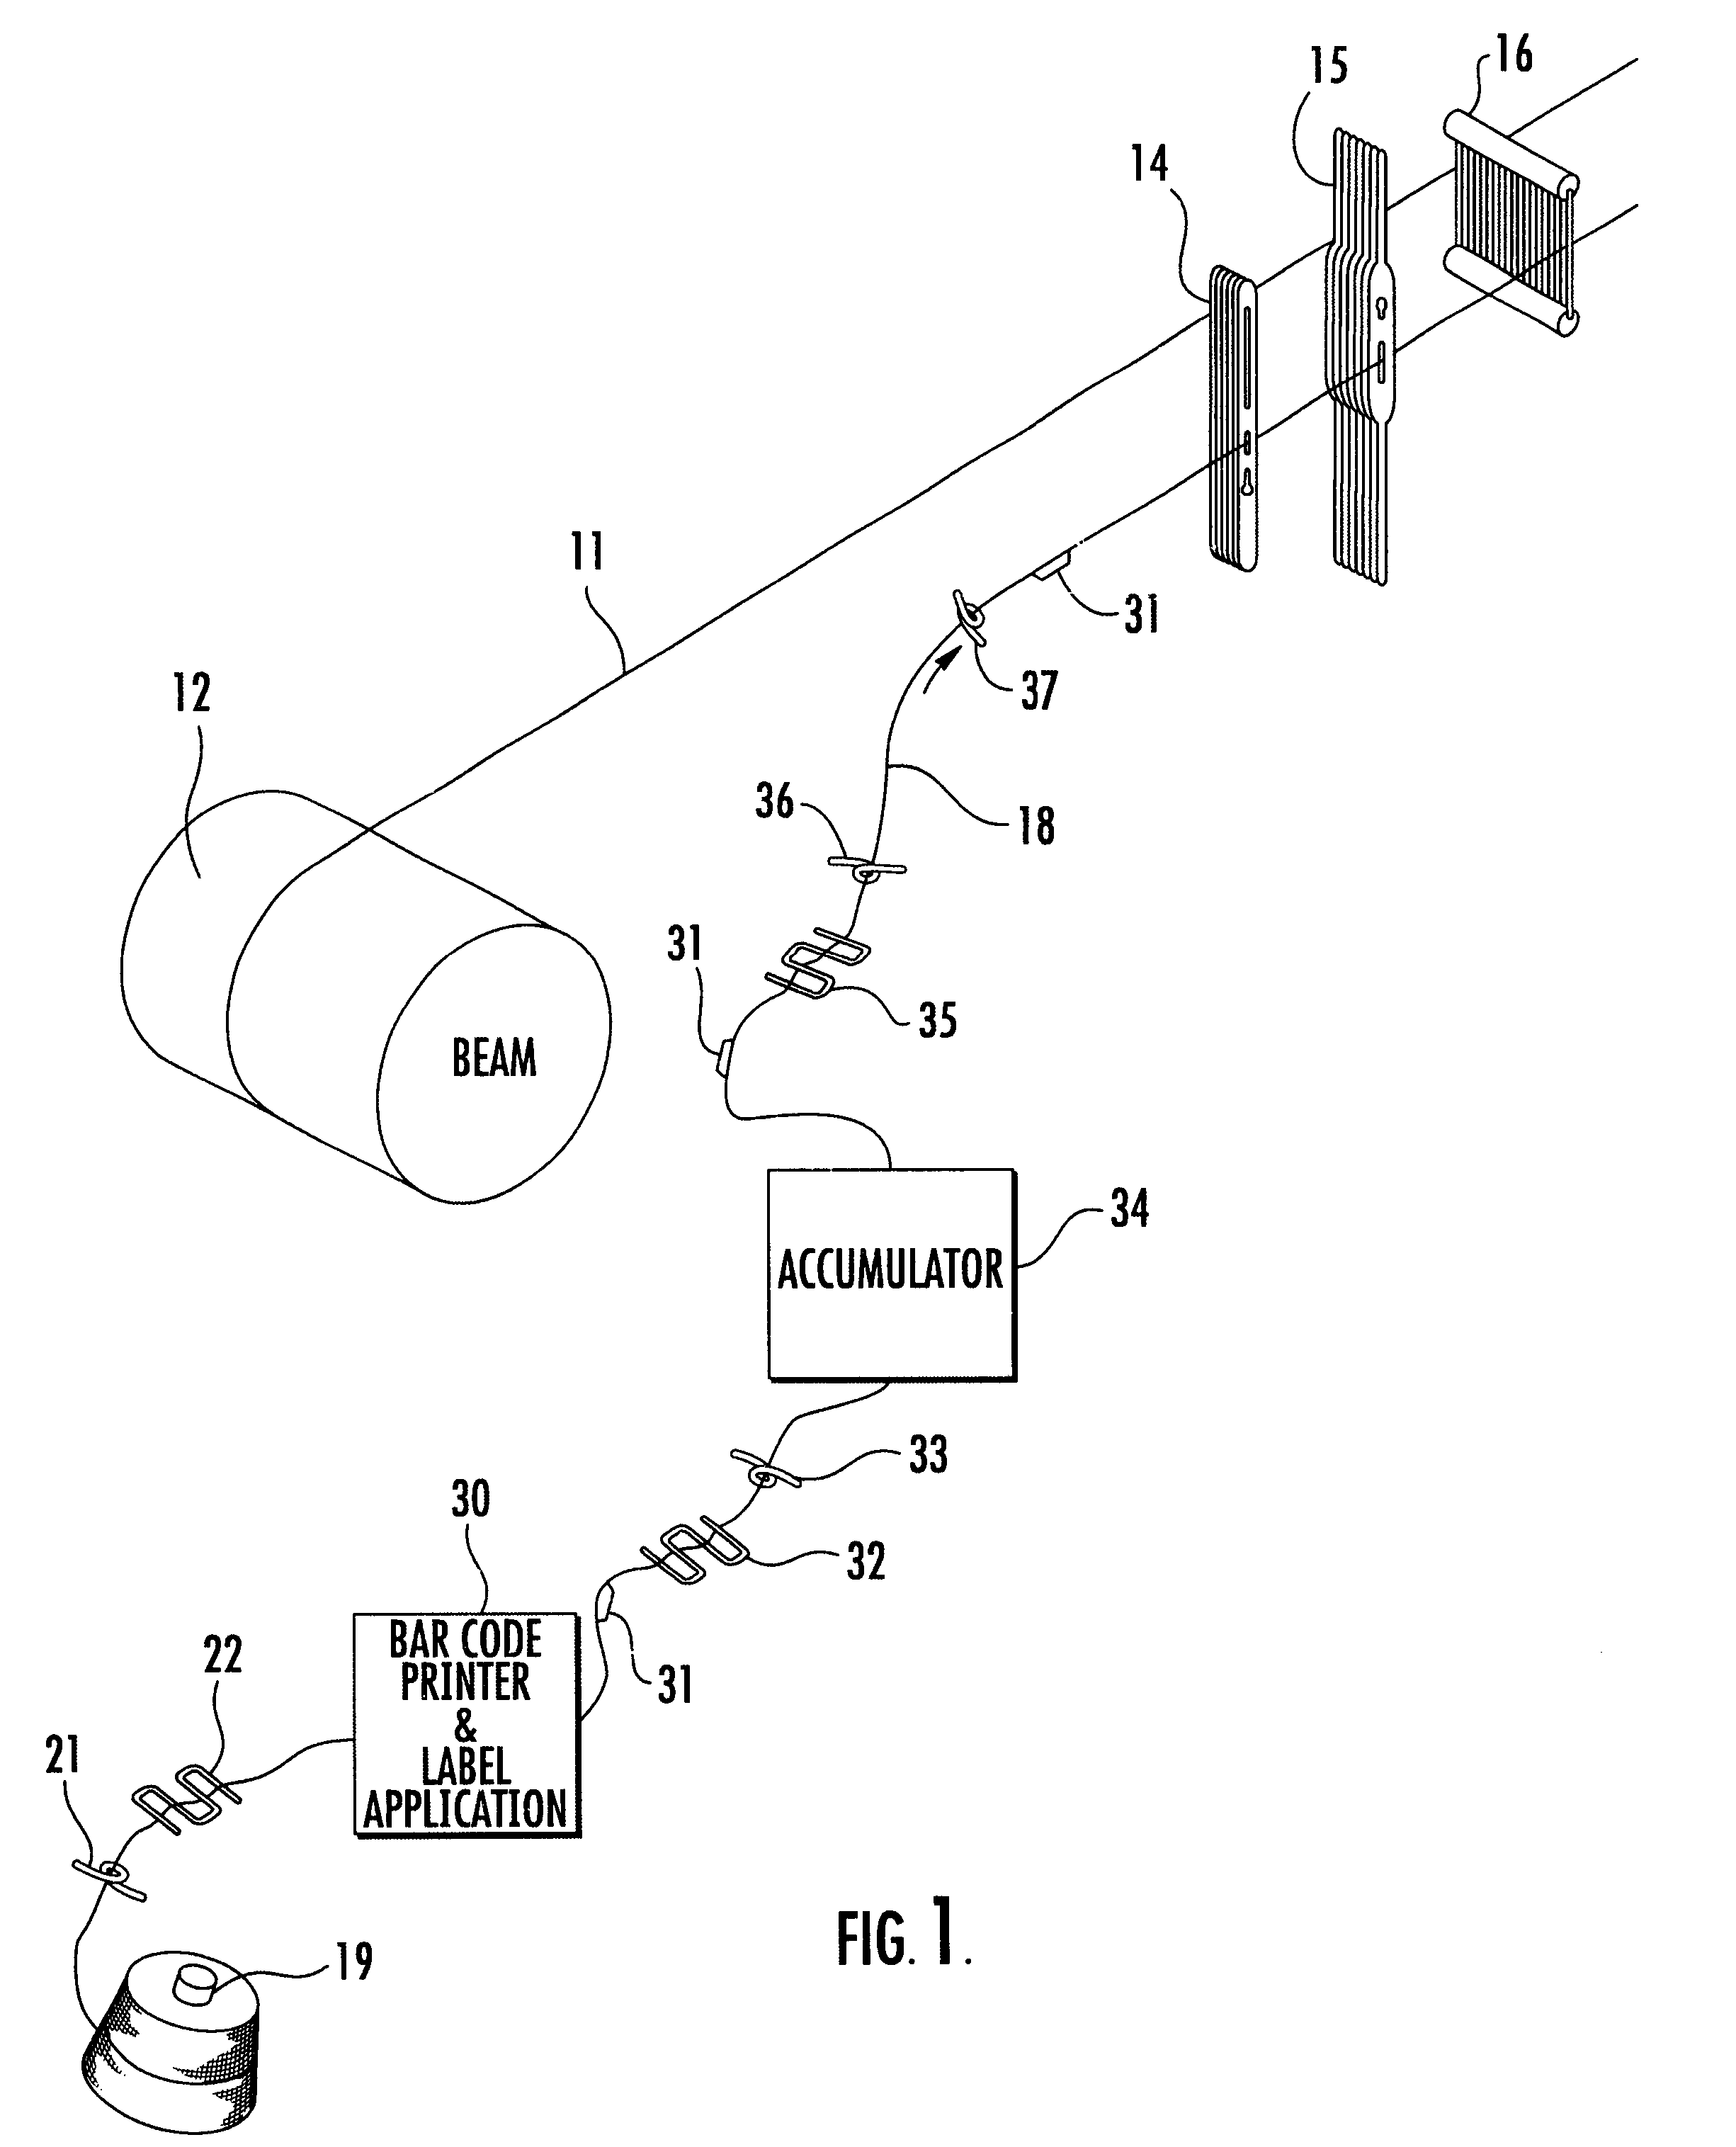 ID labeled fabric and method of applying an ID label to fabric at its point of manufacture